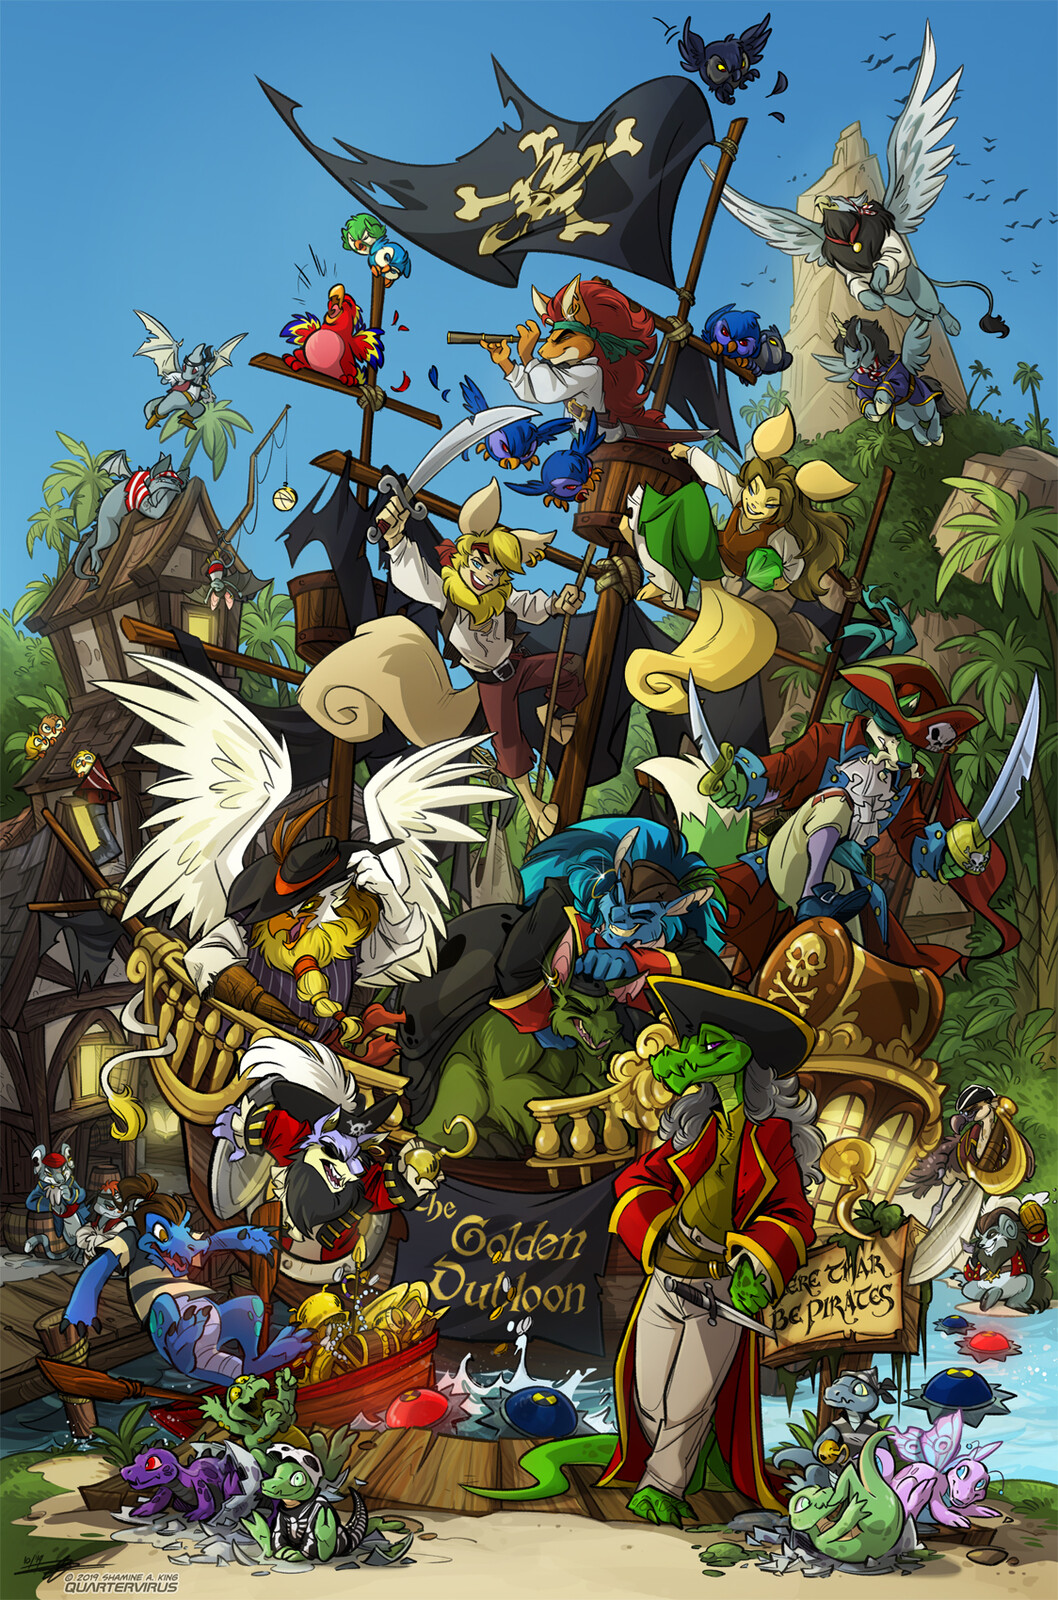 This year I participated in my first ever zine, and of course it was a Neopets one!This year I participated in my first ever zine, and of course it was a Neopets one! Get your copy here:

https://shadybug.itch.io/neopian-adventures